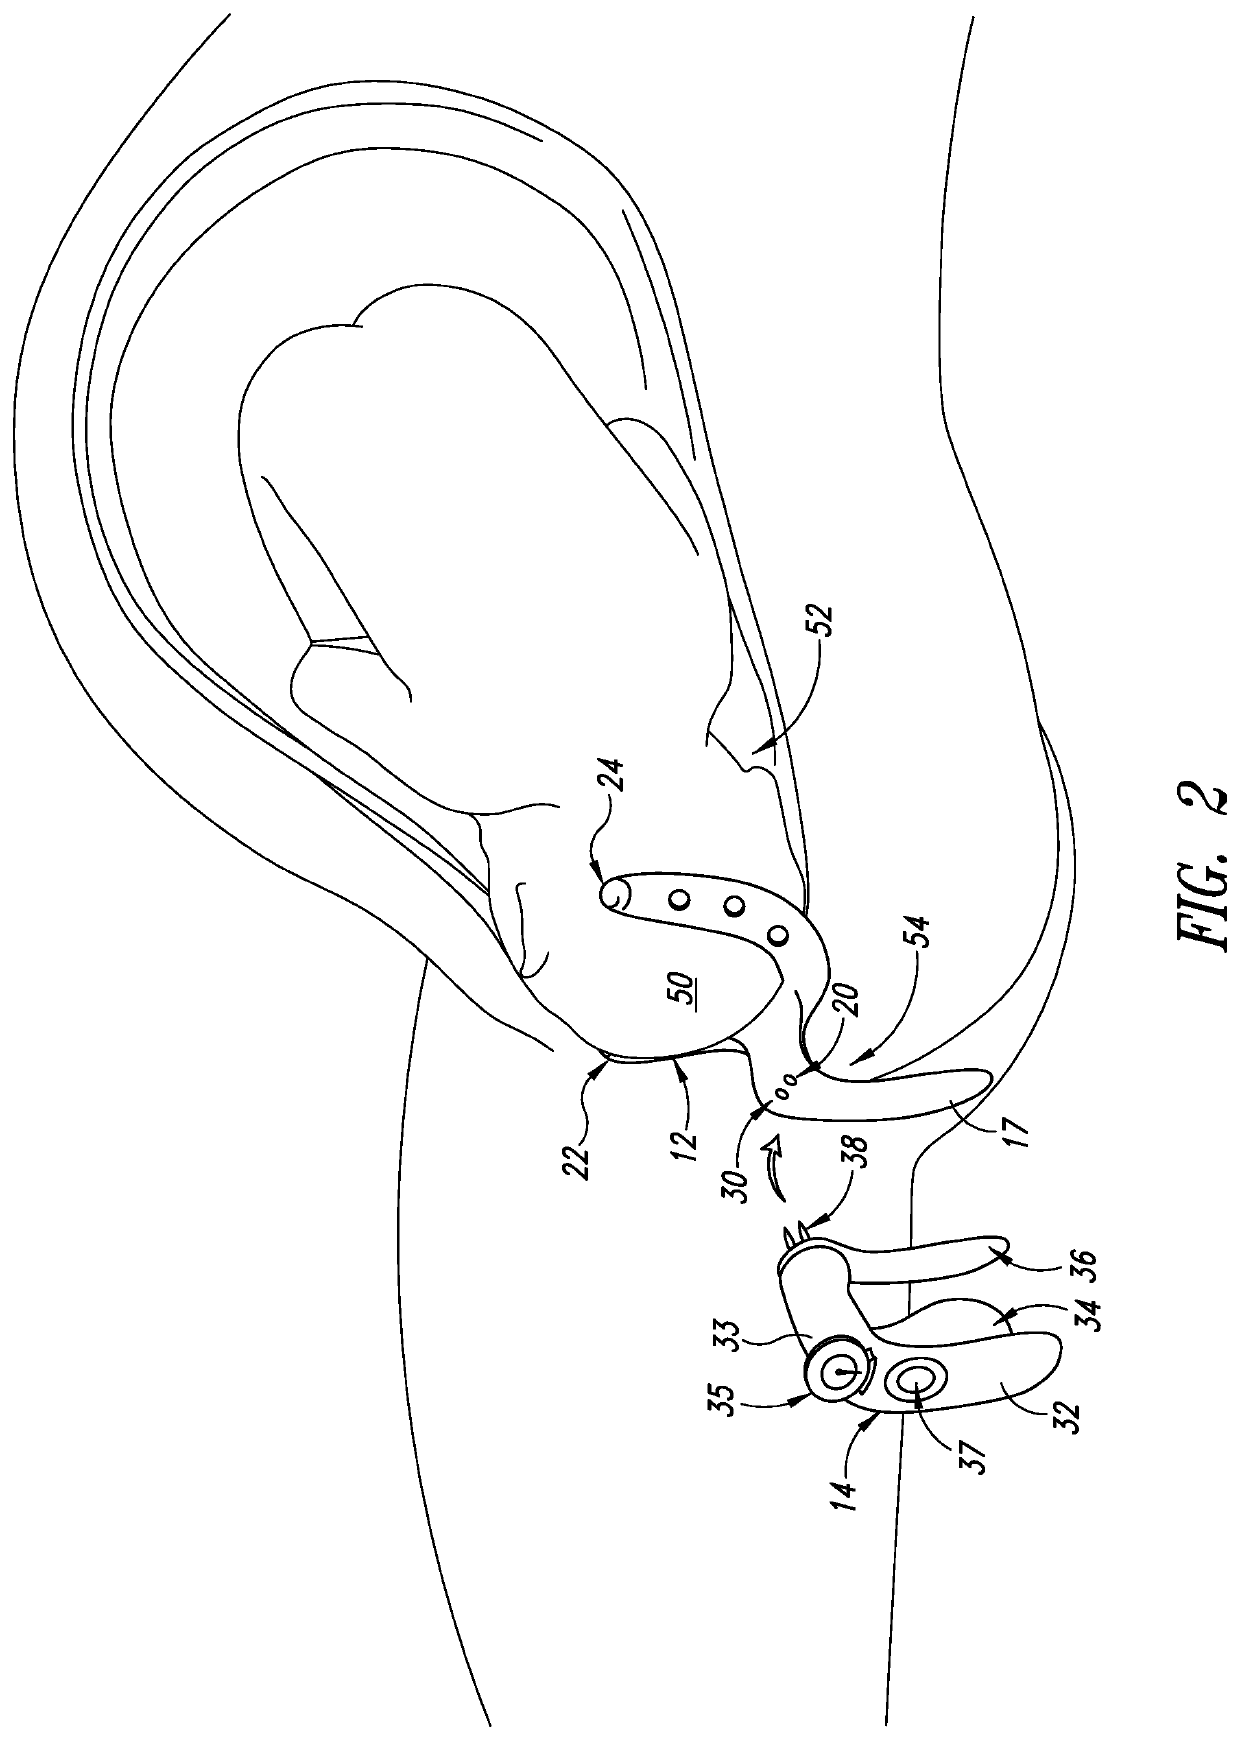 Method of protecting the pelvic floor during vaginal childbirth